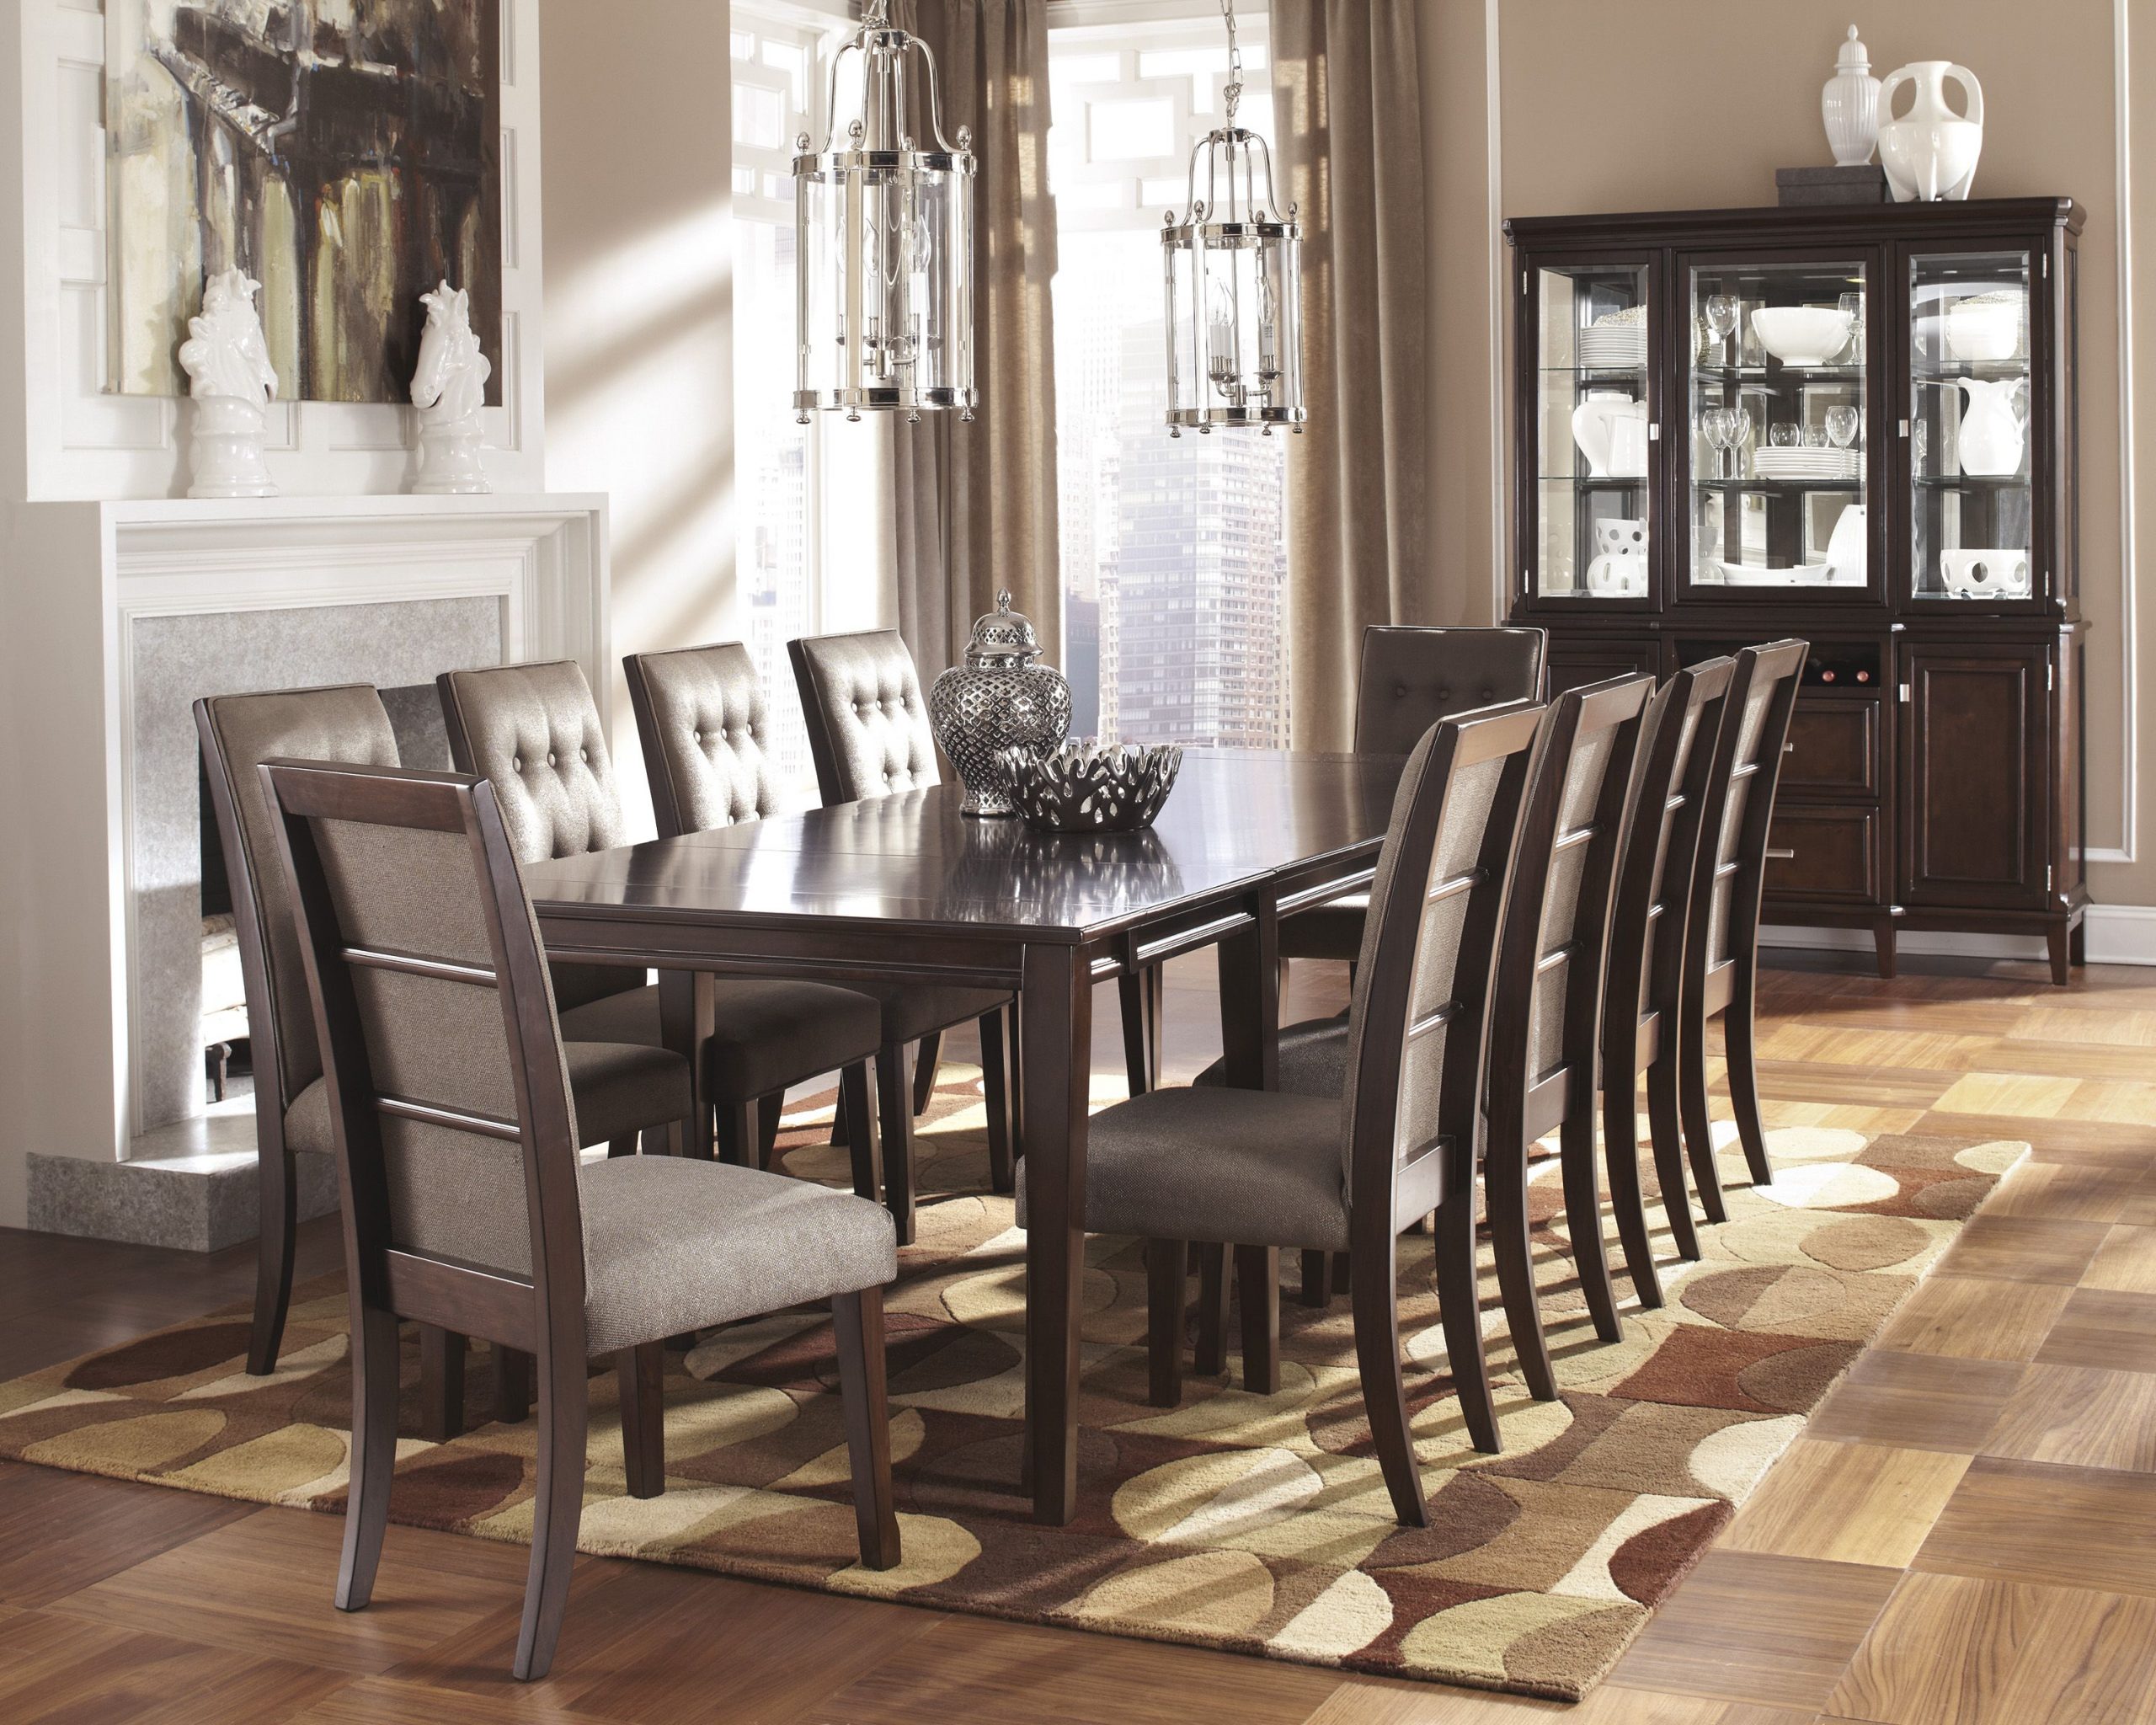 Unique Dining Room From Midas Pin Repin Diningroom with regard to sizing 3000 X 2400